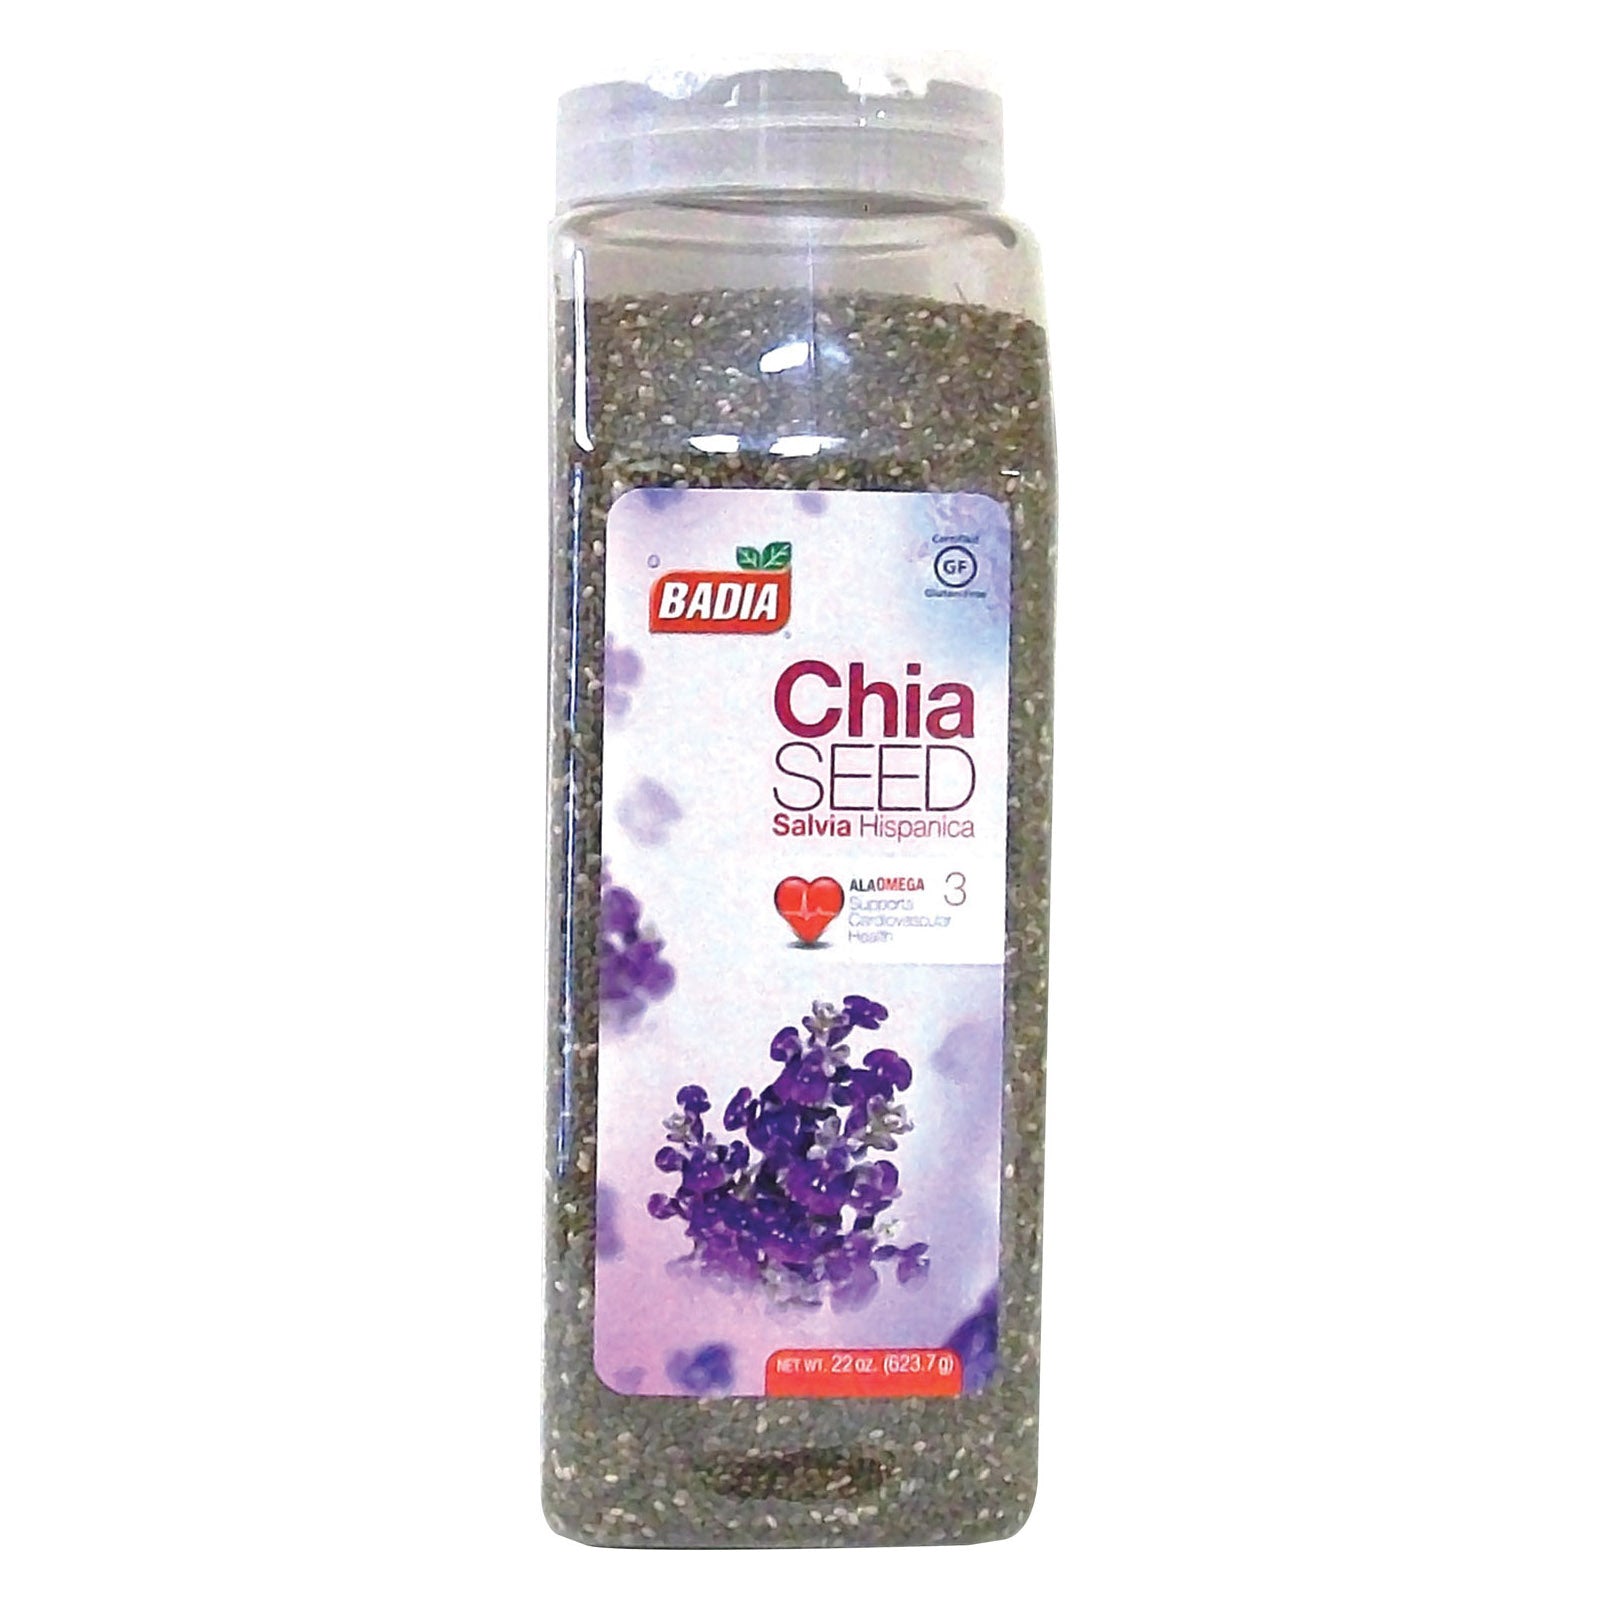 Badia Spices - Seeds - Chia - Case Of 4 - 22 Oz. - Whole Green Foods